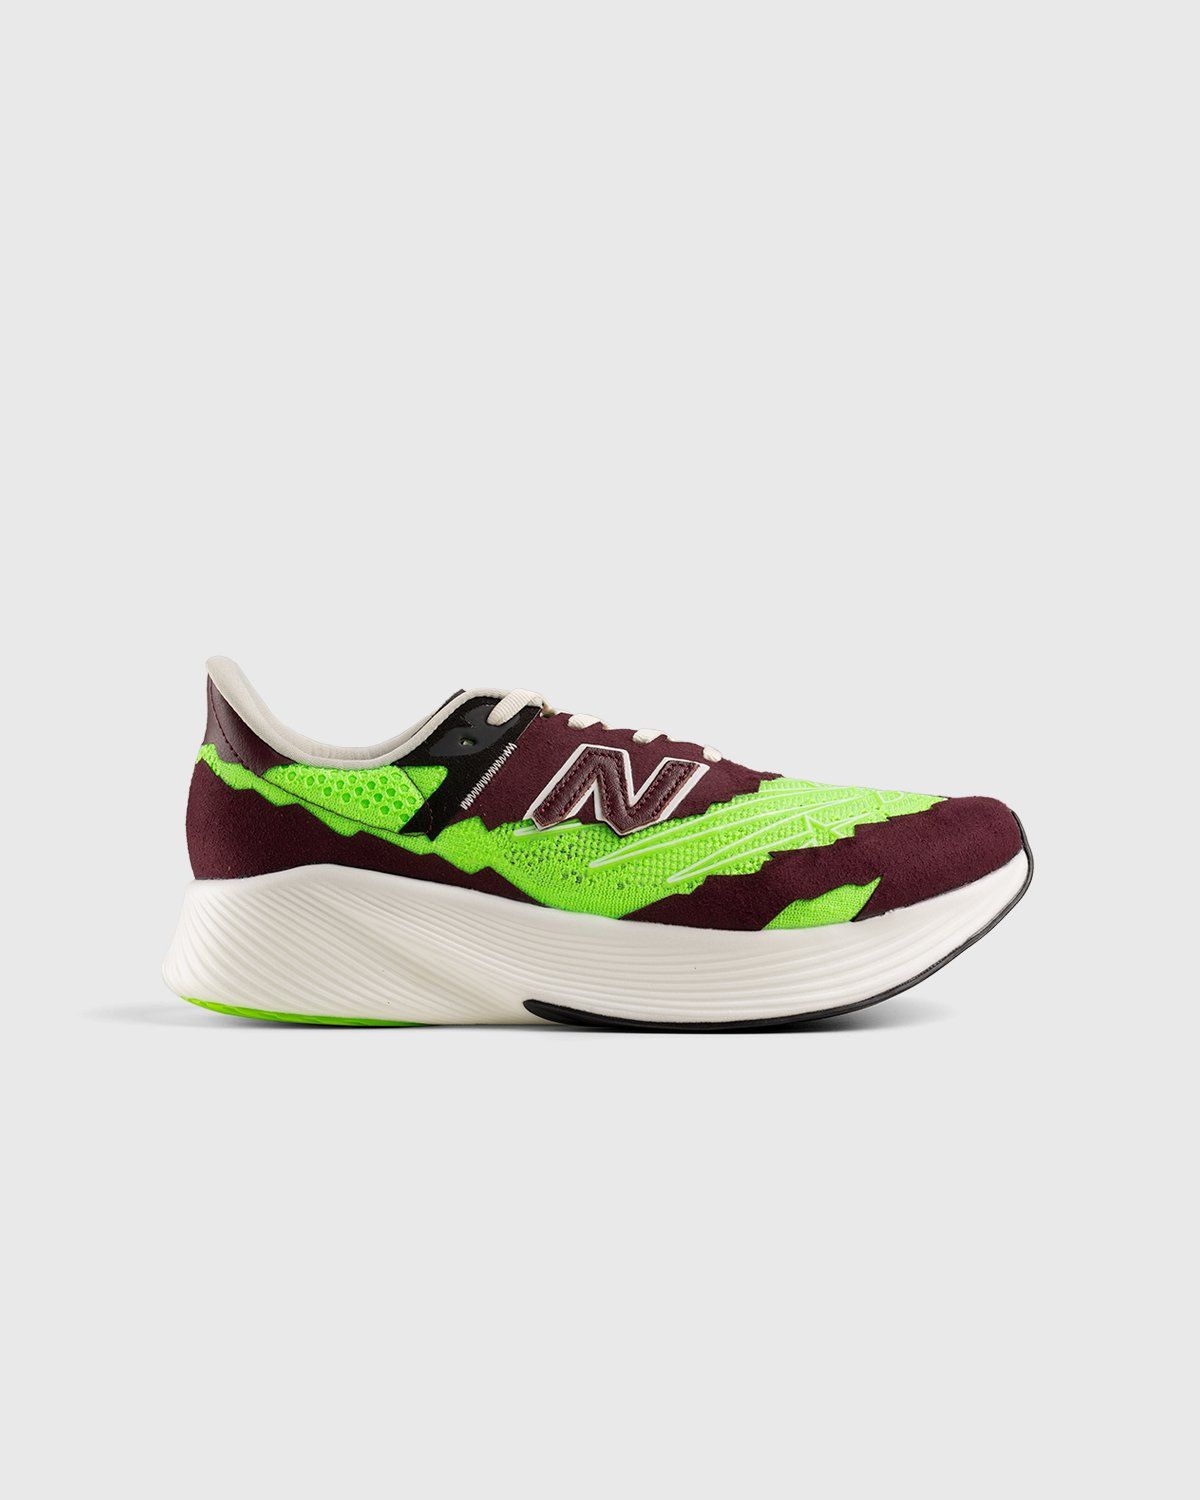 New Balance x Stone Island – FuelCell RC Elite v2 Energy Lime - Low Top Sneakers - Green - Image 1